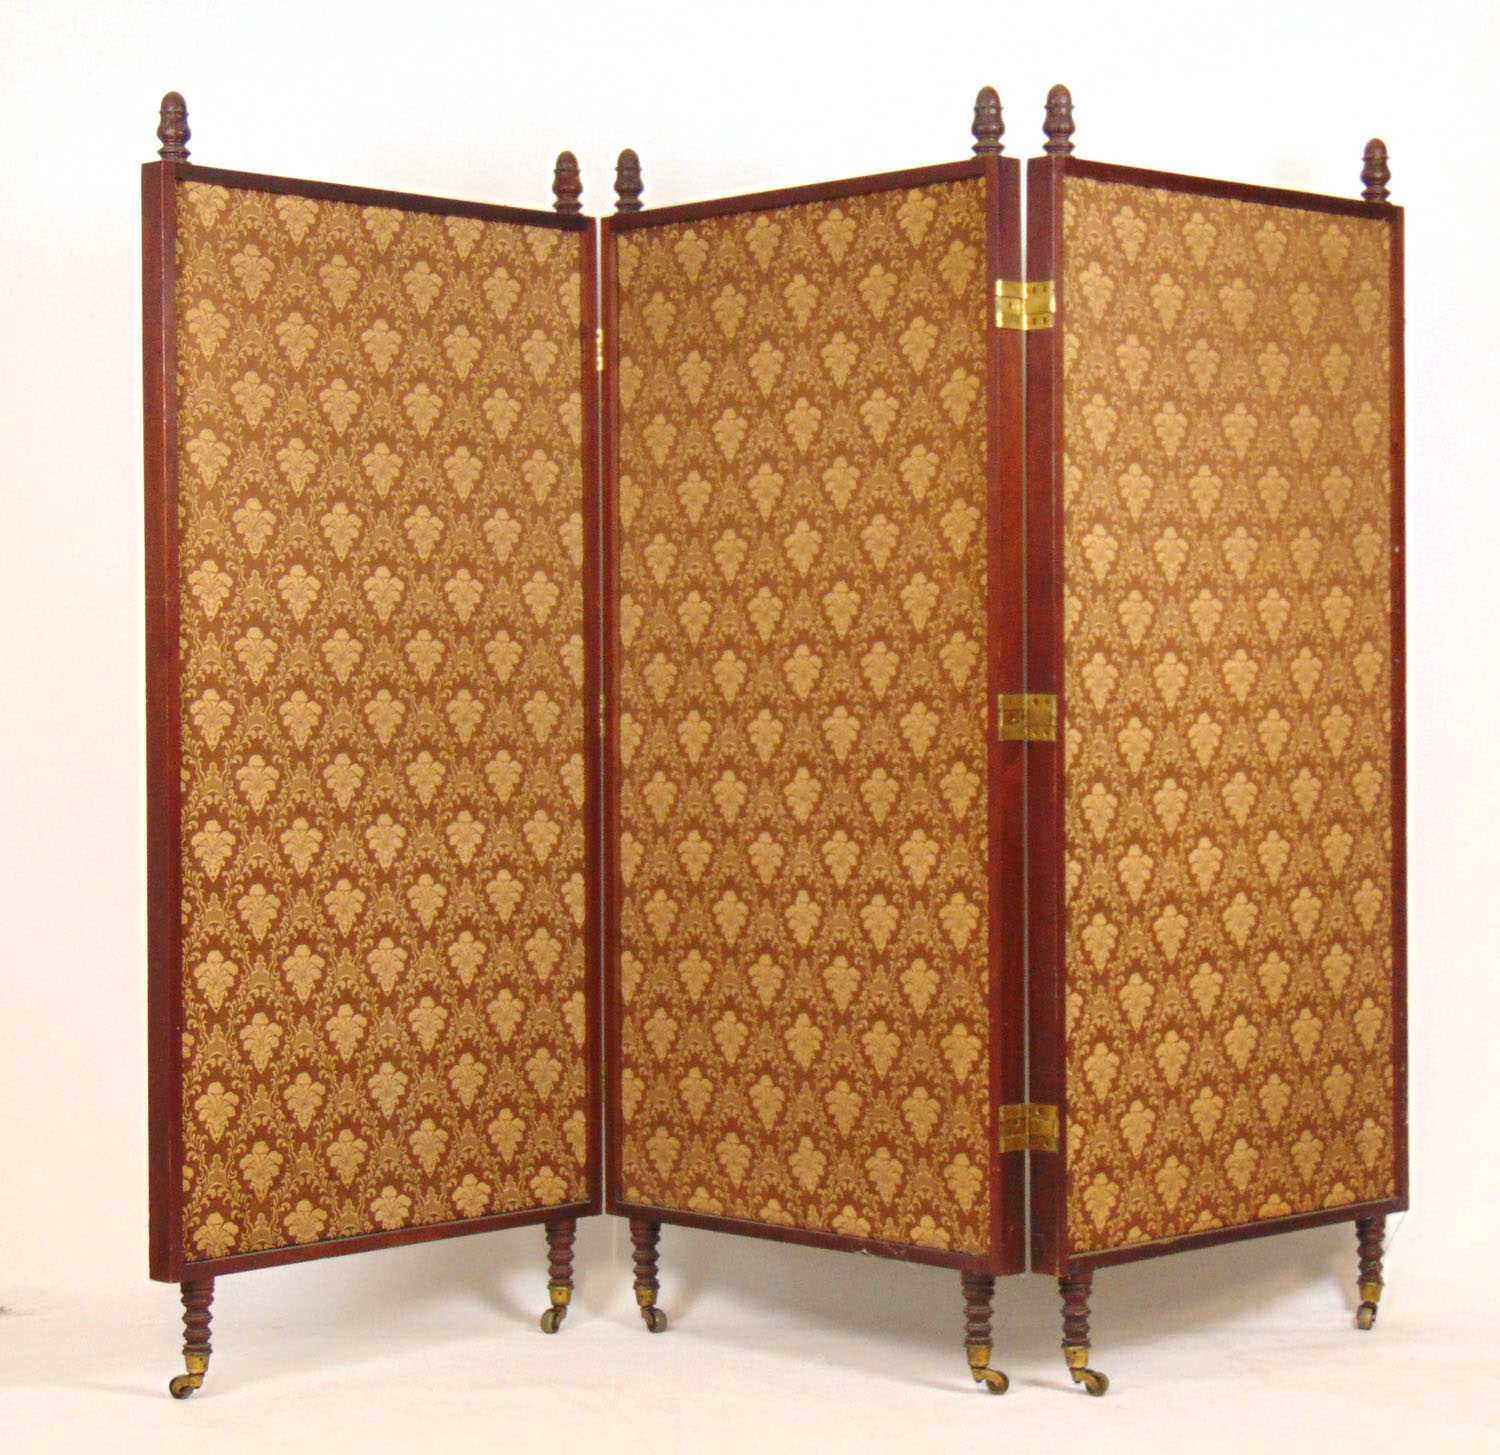 A 19th century walnut three fold screen, the finials over patterned fabric panels on turned feet and